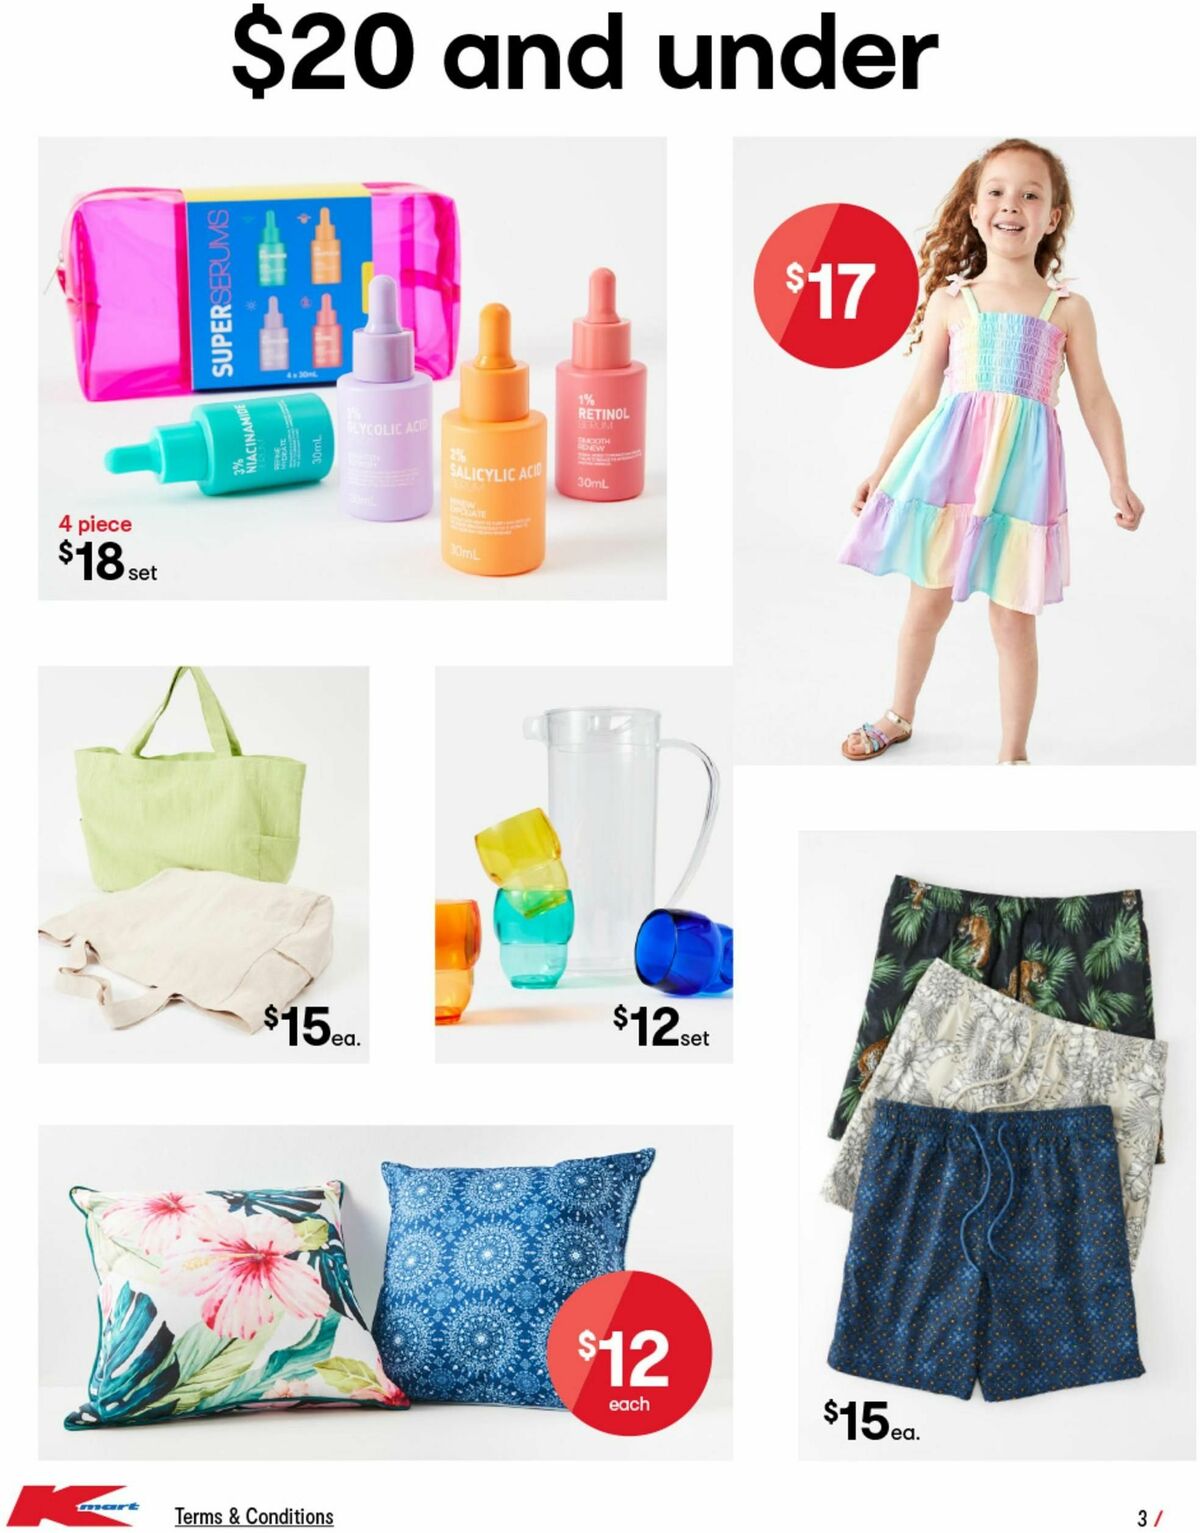 Kmart Low Prices for Life - Summer Catalogues from 16 November